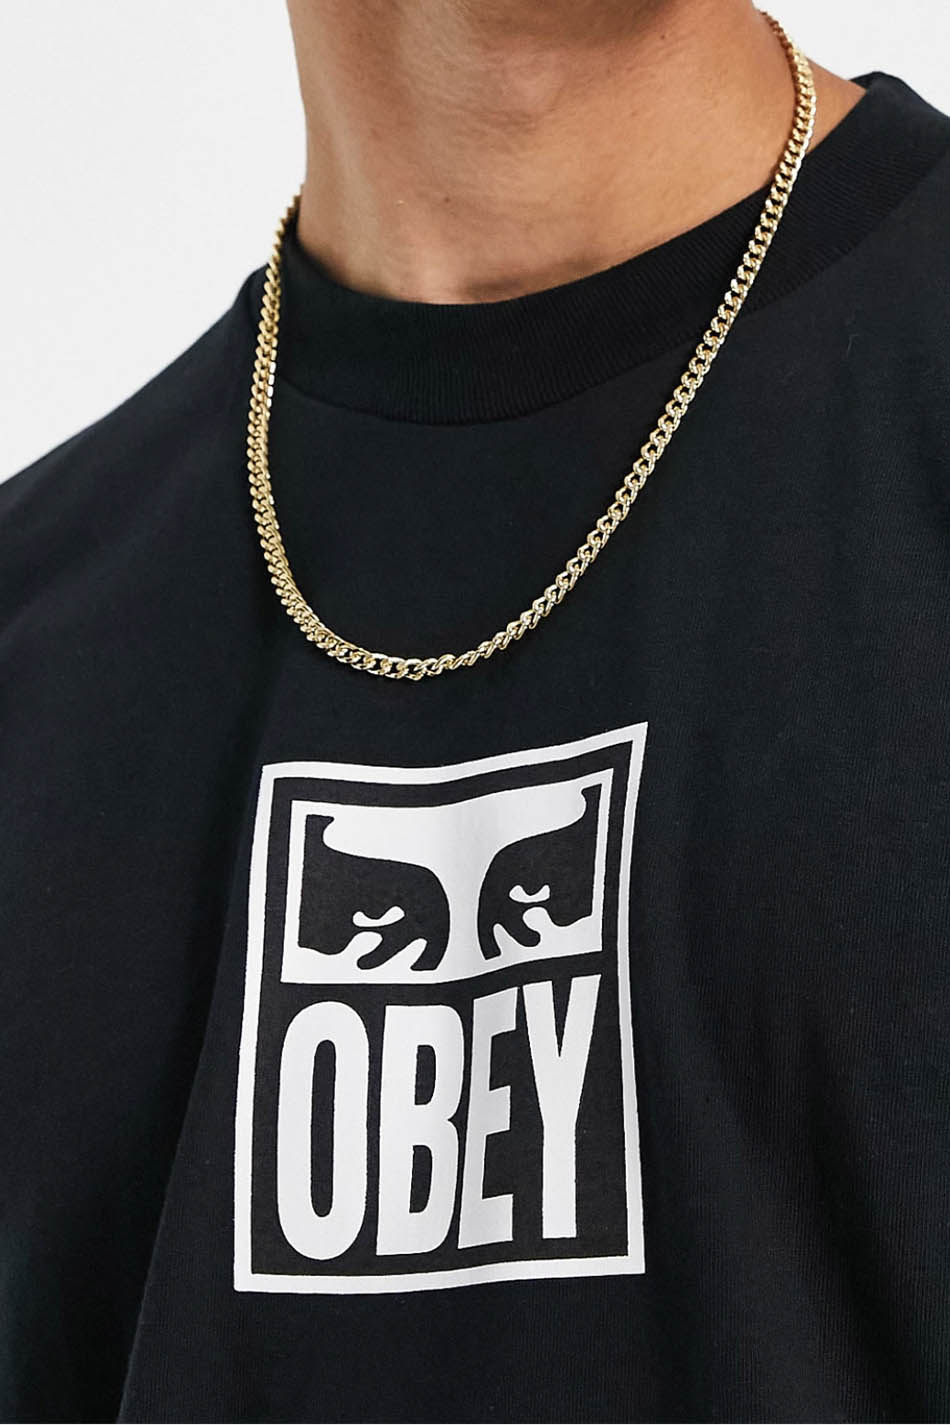 T-shirt Obey Eyes Icon